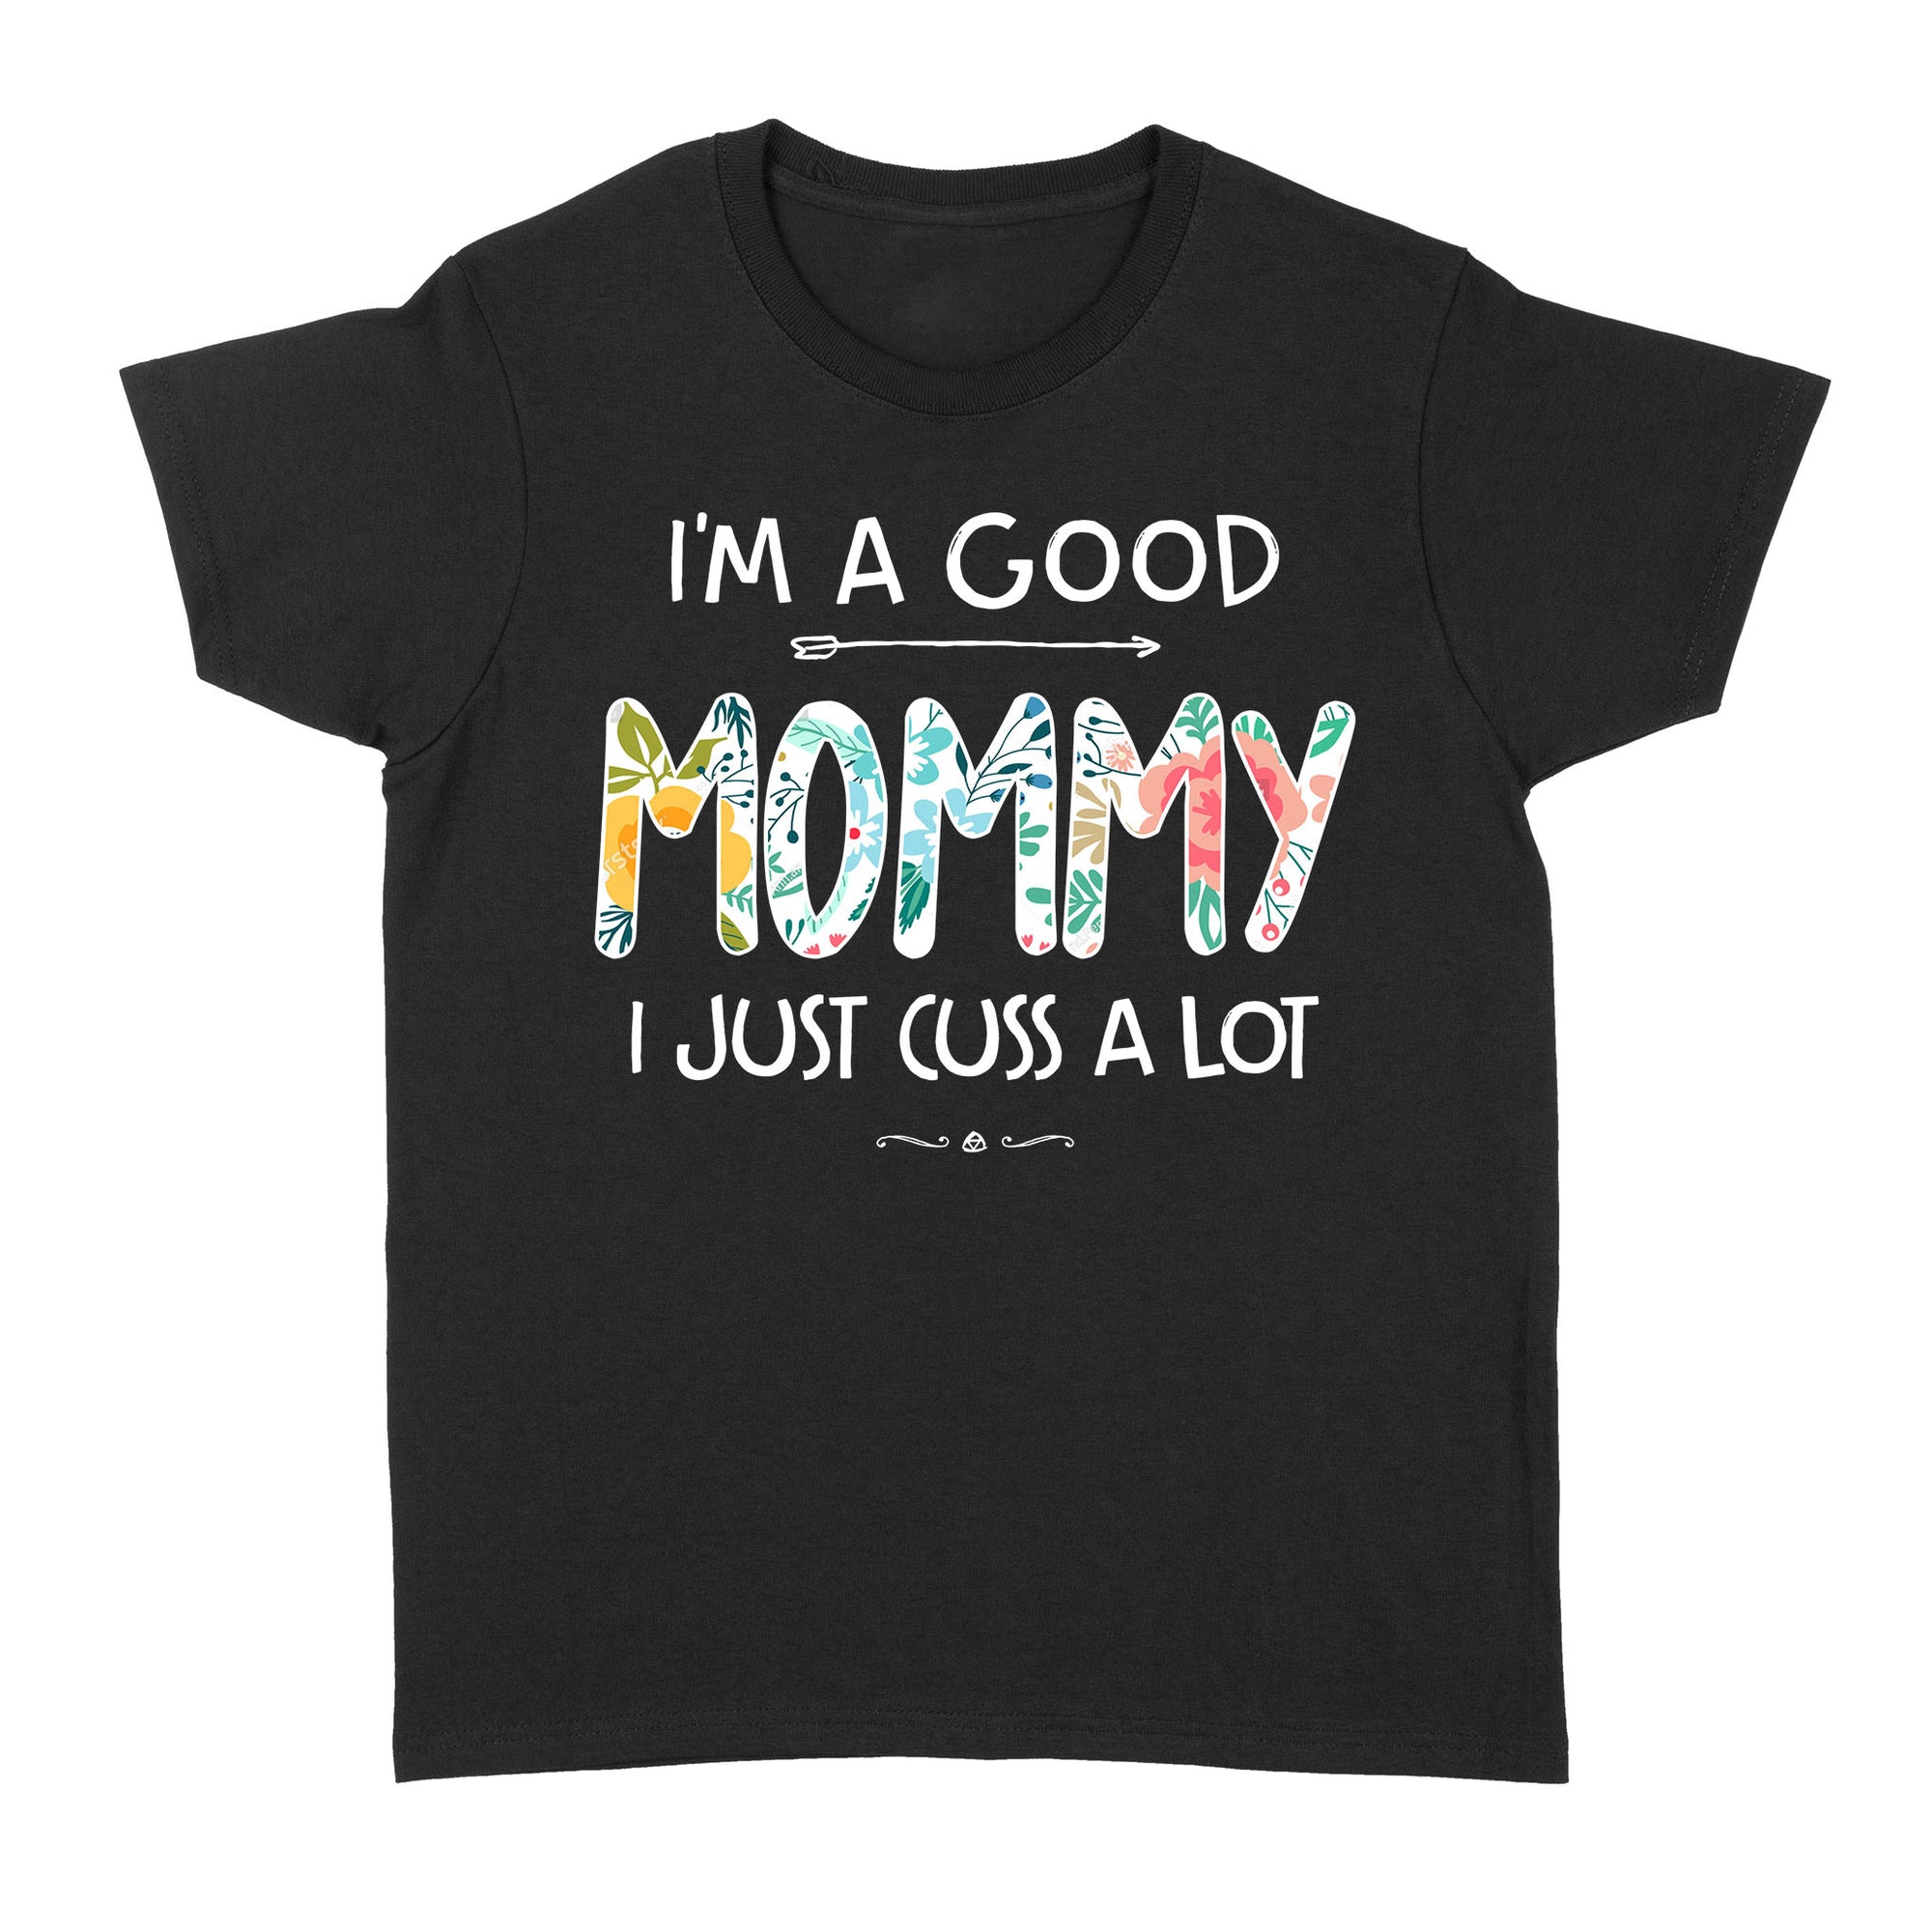 I Am A Good Mommy I Just Cuss A Lot Funny Mothers Day Gift Ideas For Mother Mom Grandma Wife Her Friend Women W - Standard Women's T-shirt